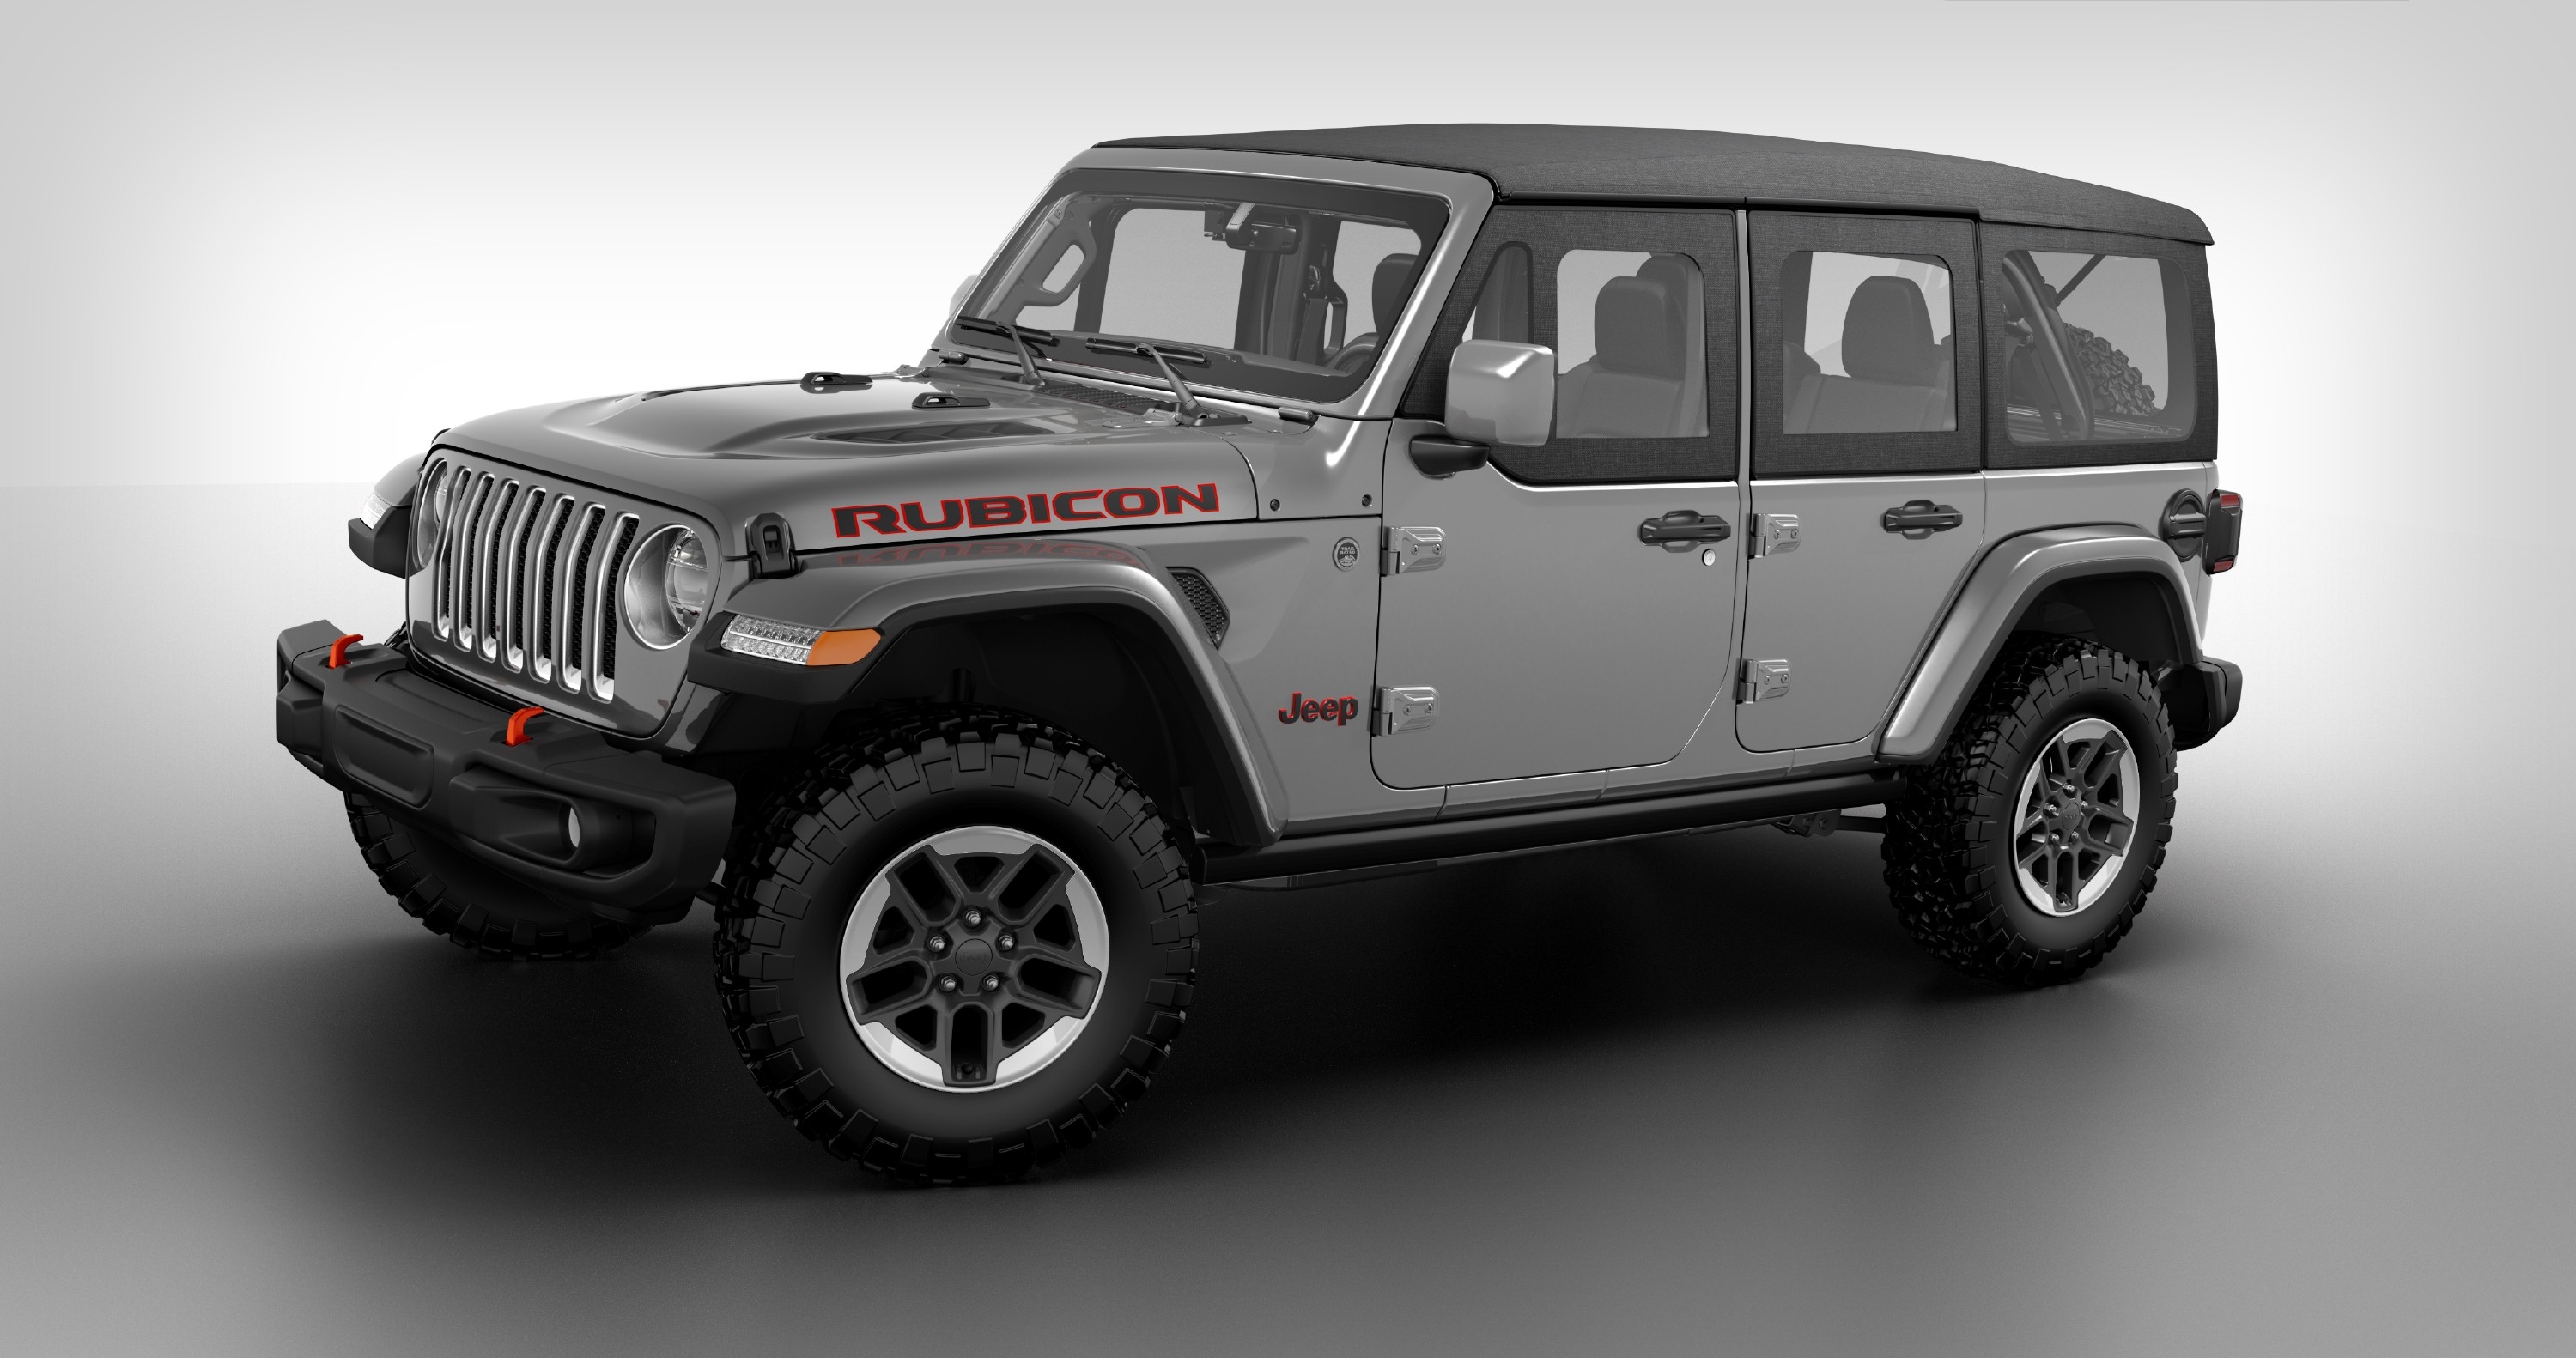 2021 Jeep Wrangler Half Doors Are Now Officially Available From 2 350 Autoevolution